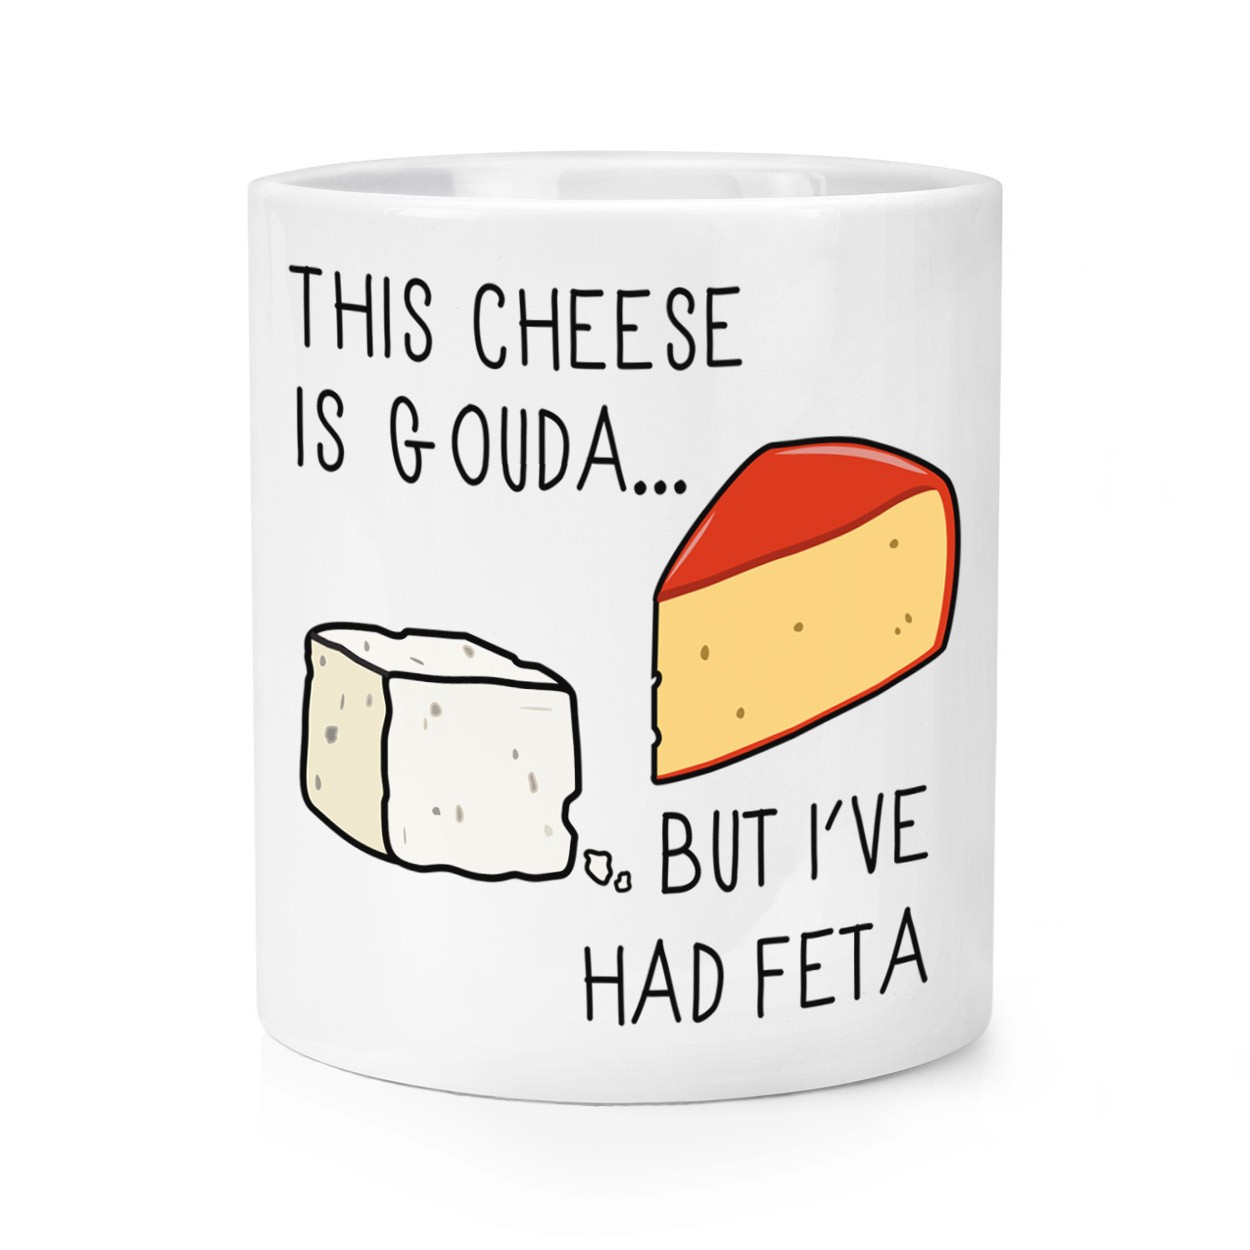 This Cheese Is Gouda But I've Had Feta Makeup Brush Pencil Pot